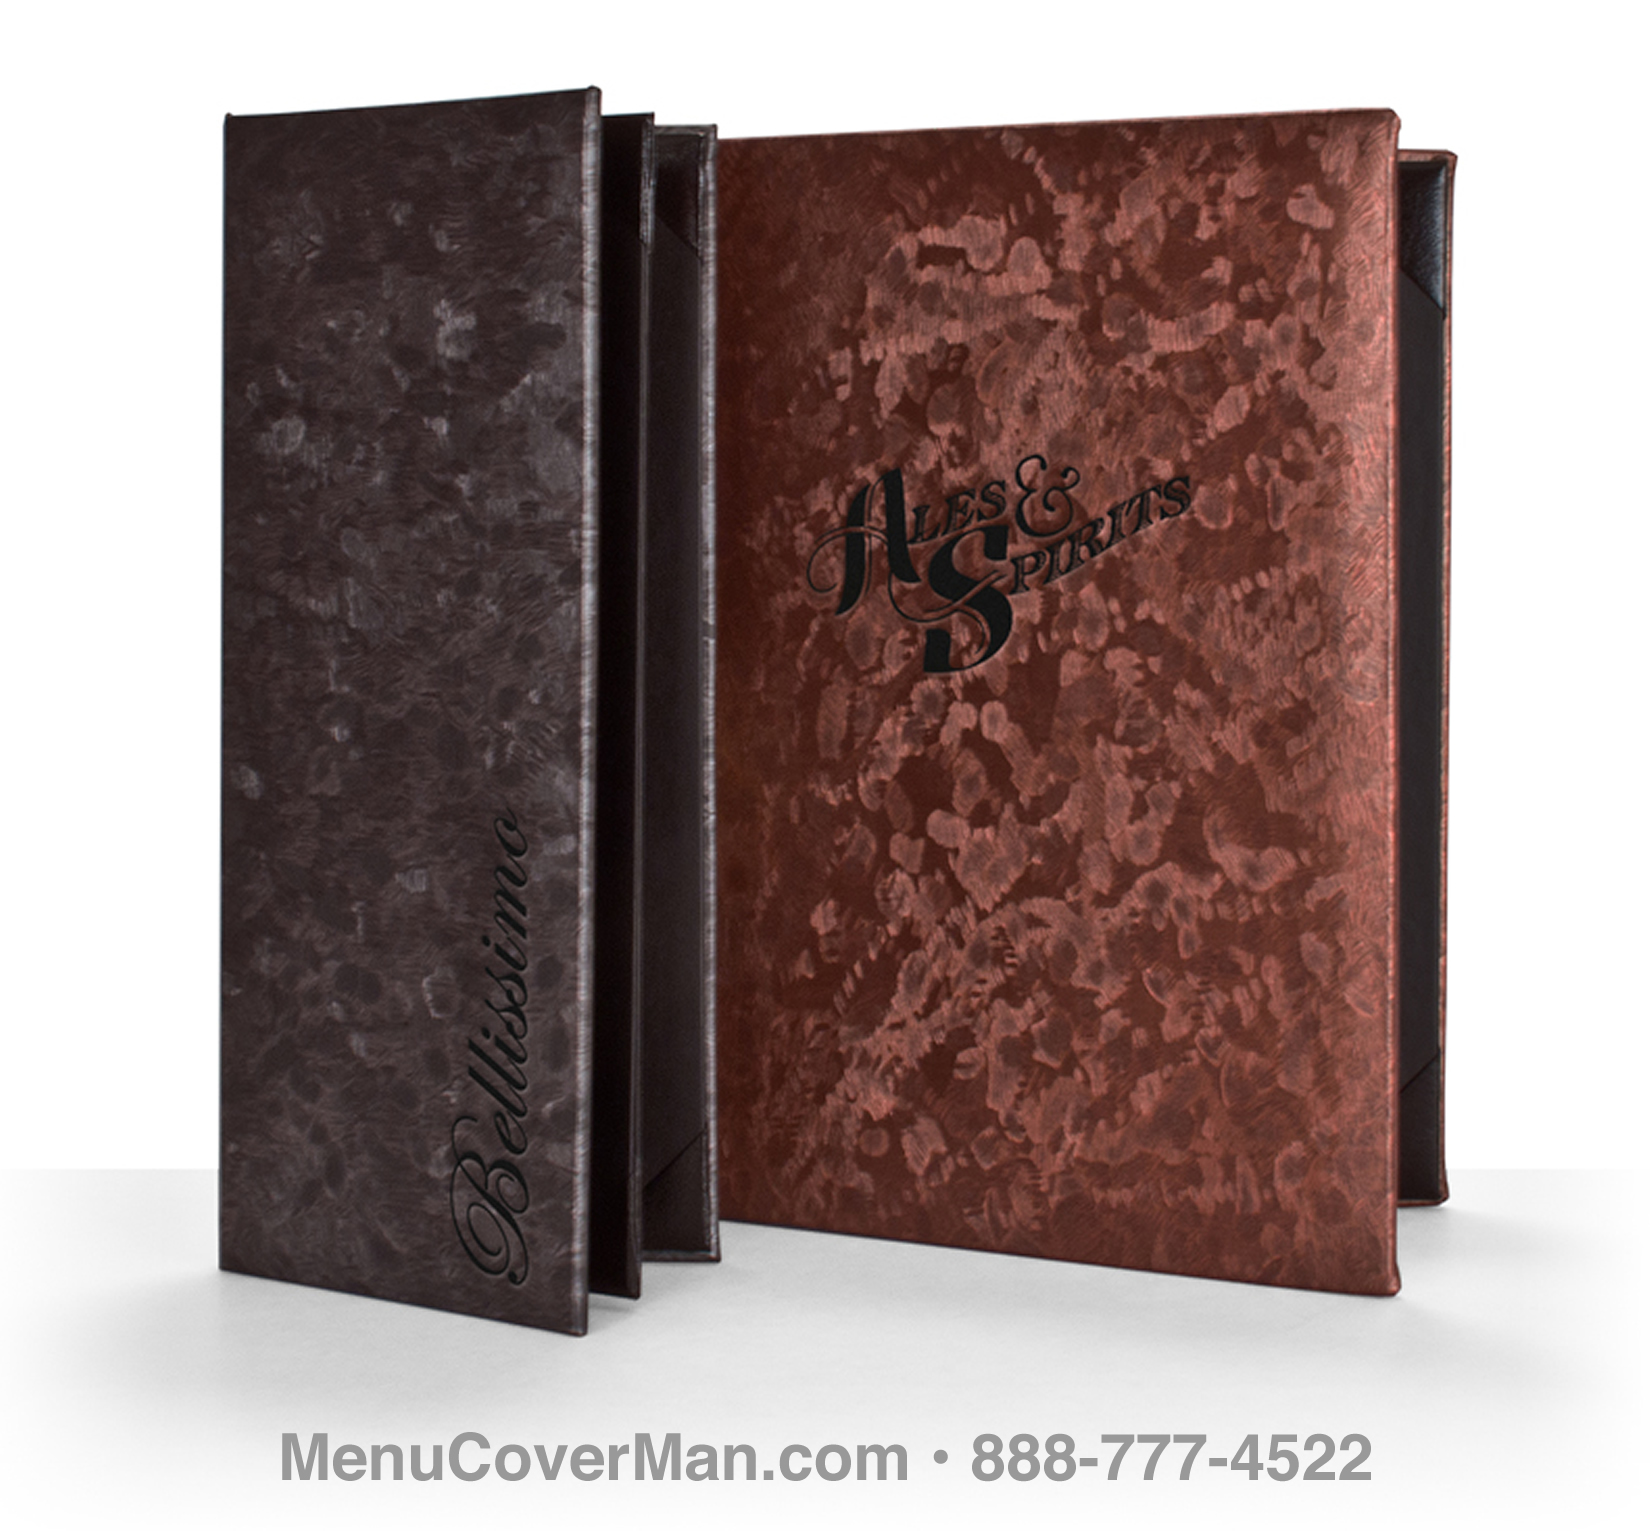 Brushed Metallic Menu Covers Frontspiece.